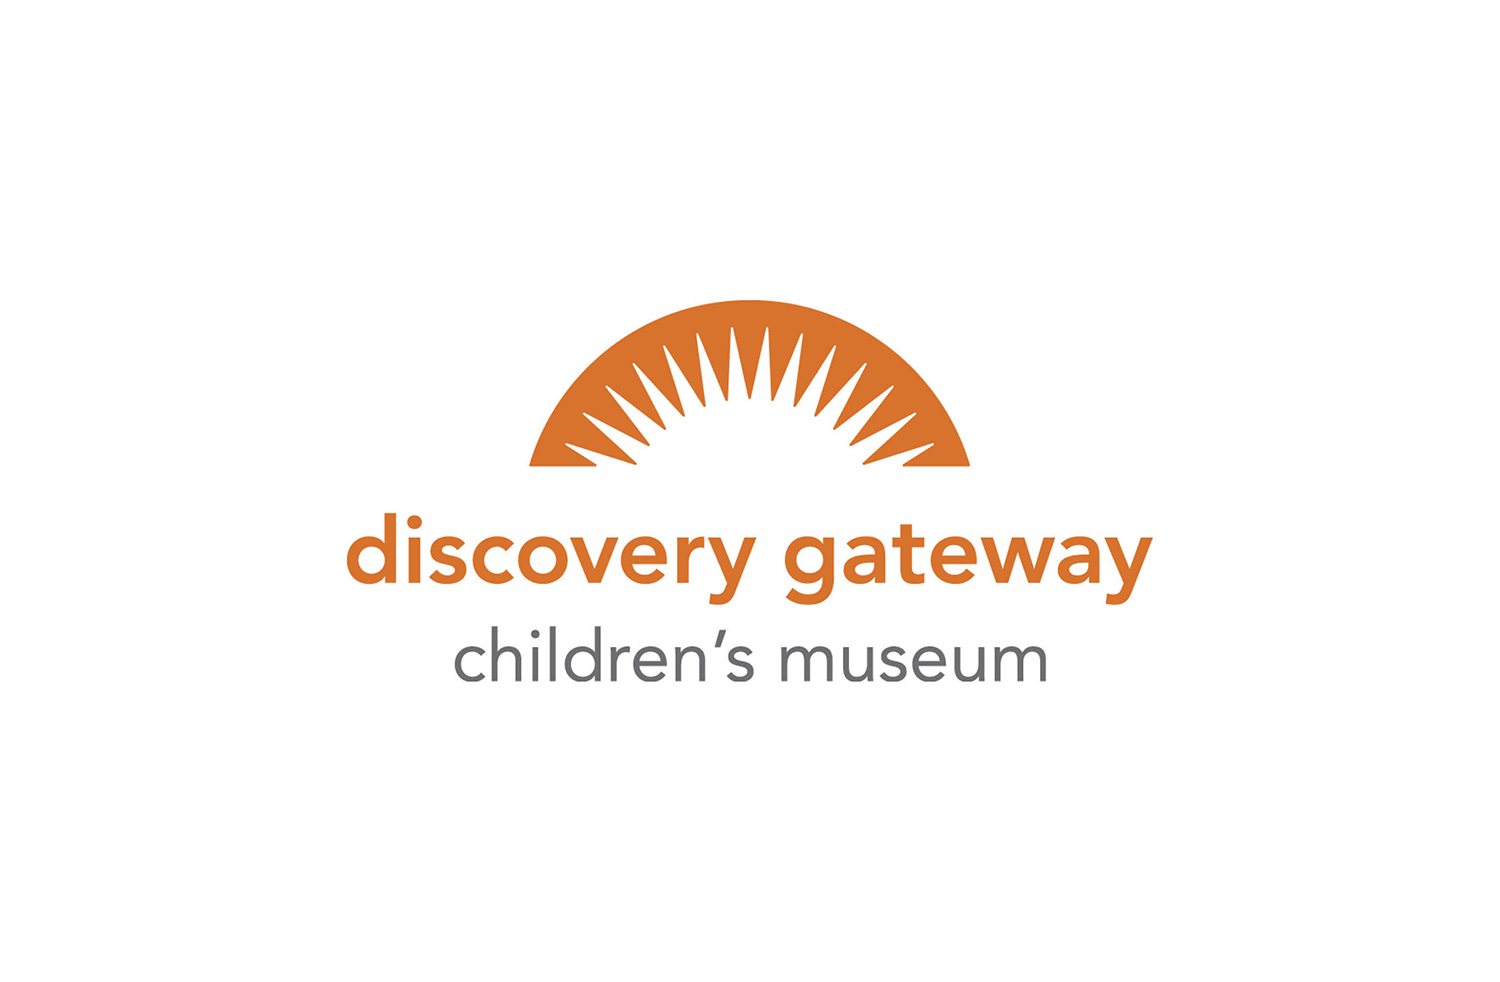 Boss_Display_Client_Discovery_Gateway_Childrens_Museum_Logo.jpg